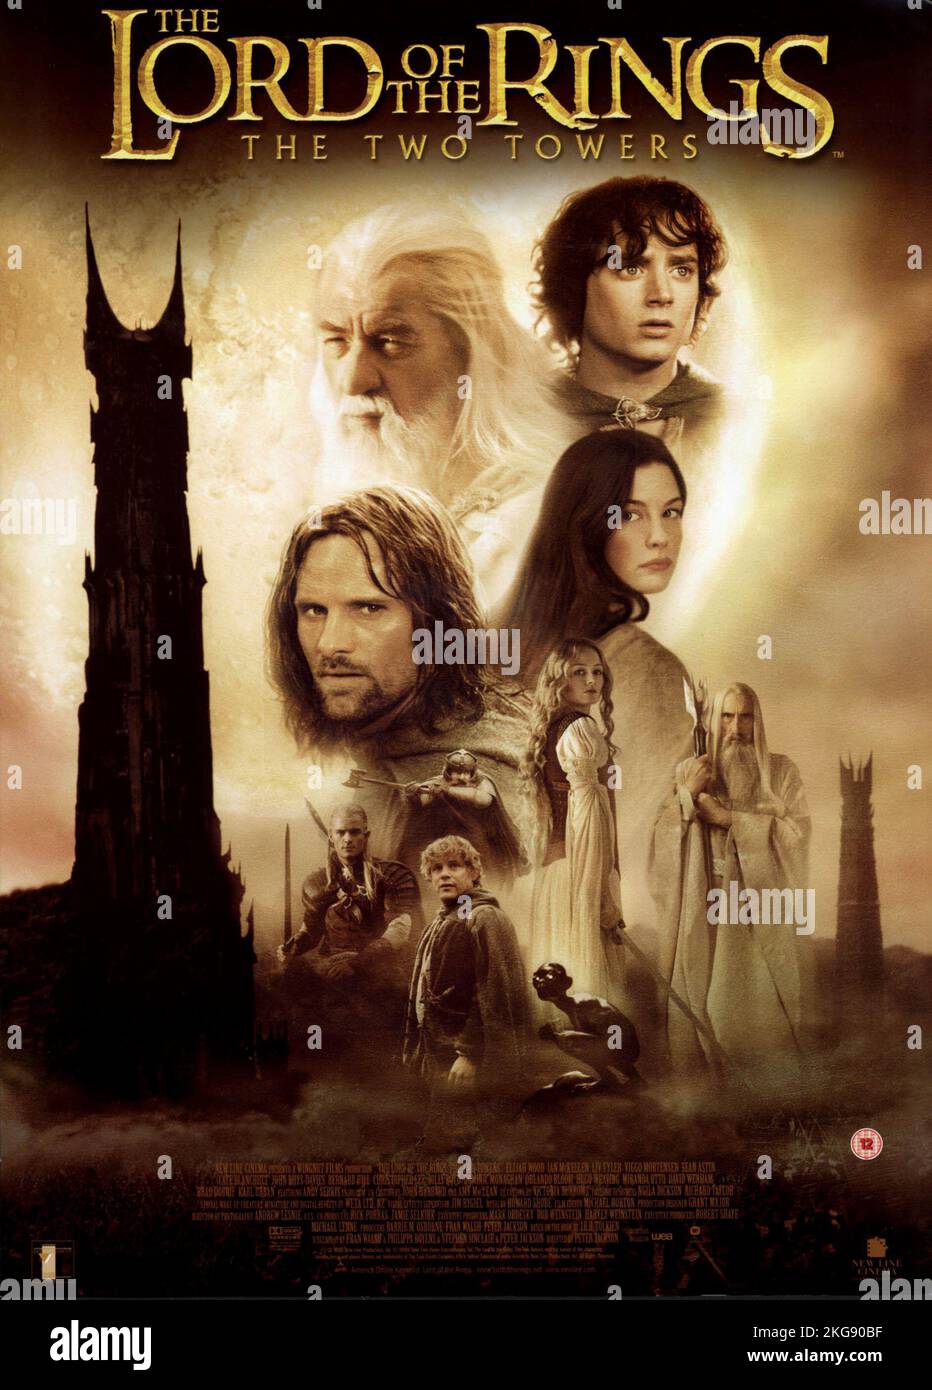 The Lord Of The Rings: The Two Towers  Movie Poster Stock Photo